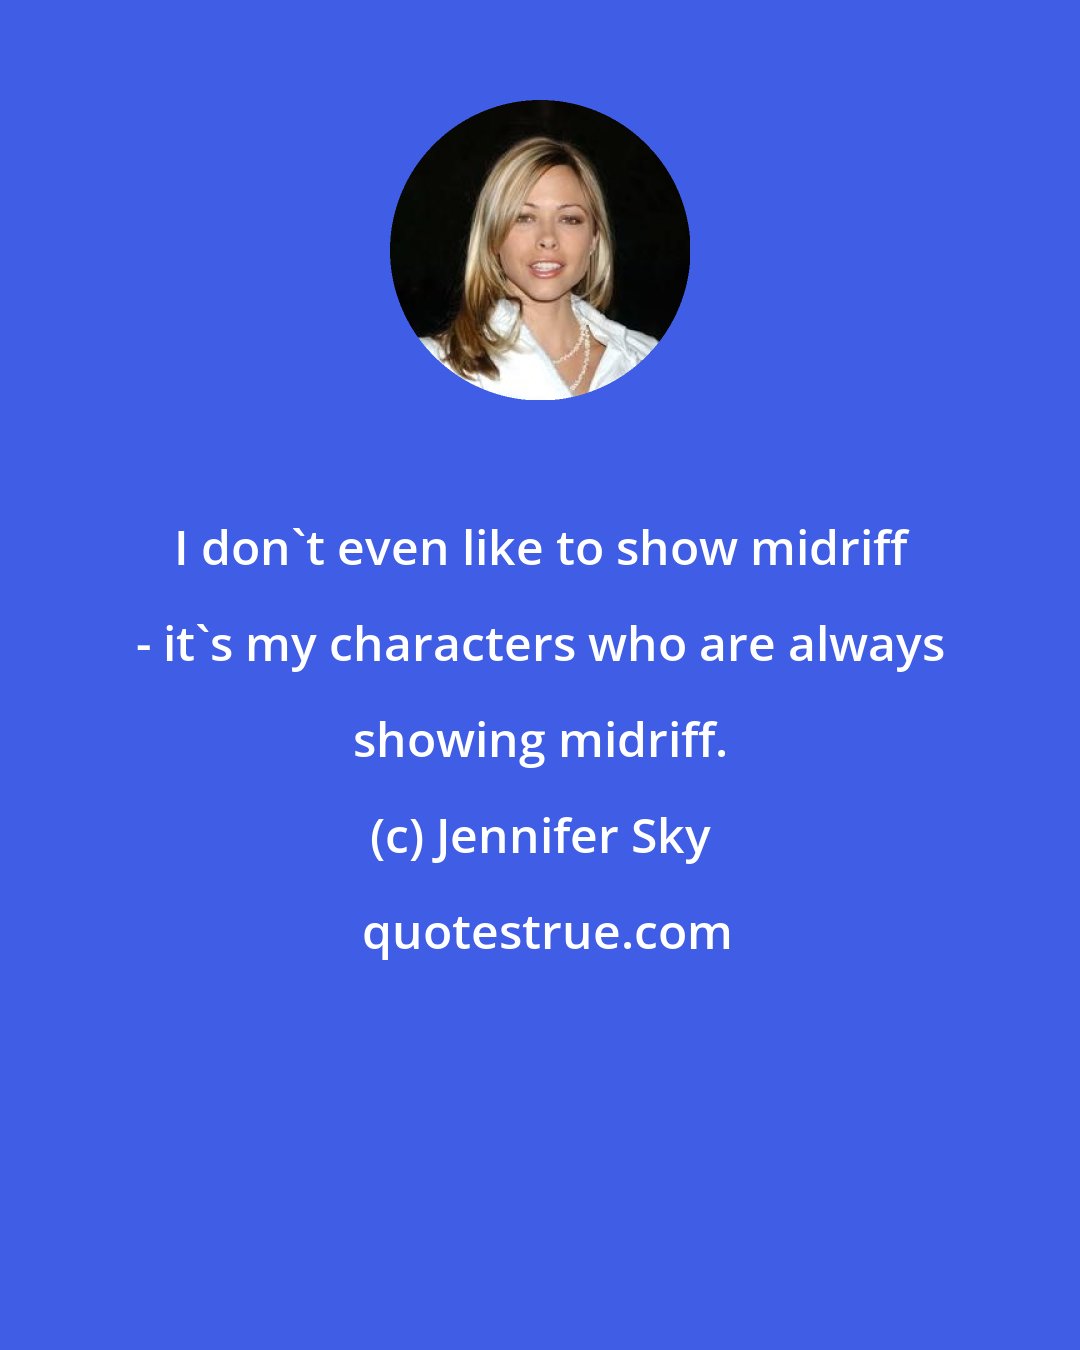 Jennifer Sky: I don't even like to show midriff - it's my characters who are always showing midriff.